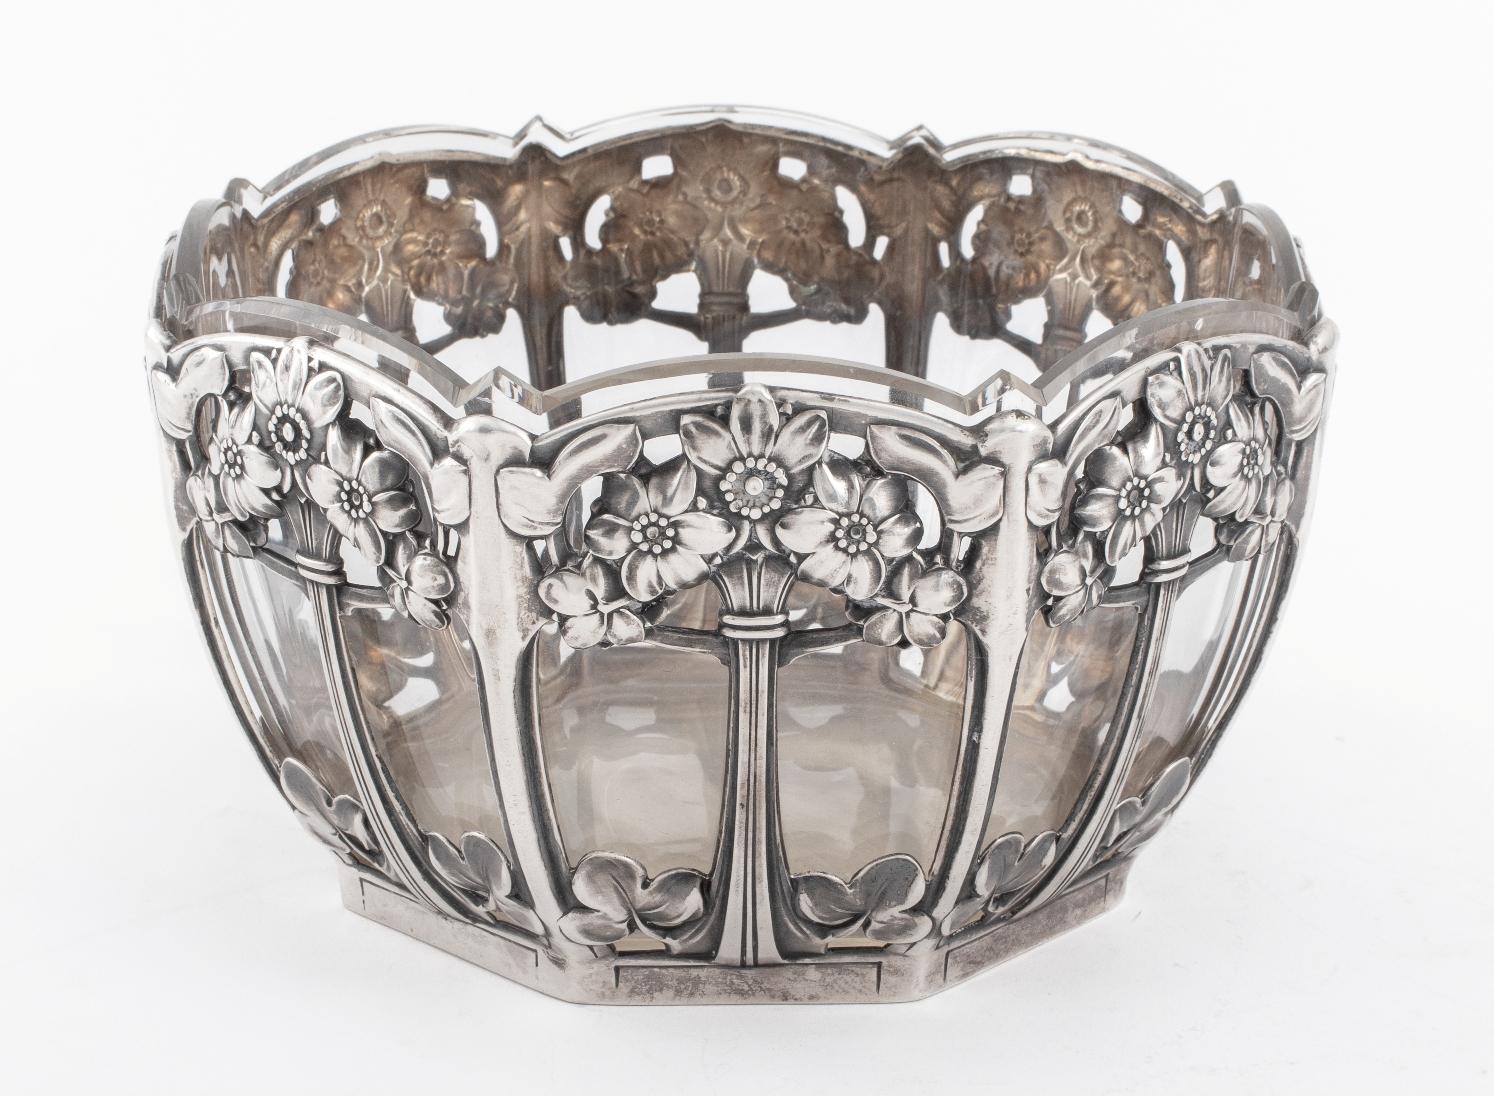 L. Posen Jugendstil Silver and Glass Bowl, circa 1905 In Good Condition For Sale In New York, NY